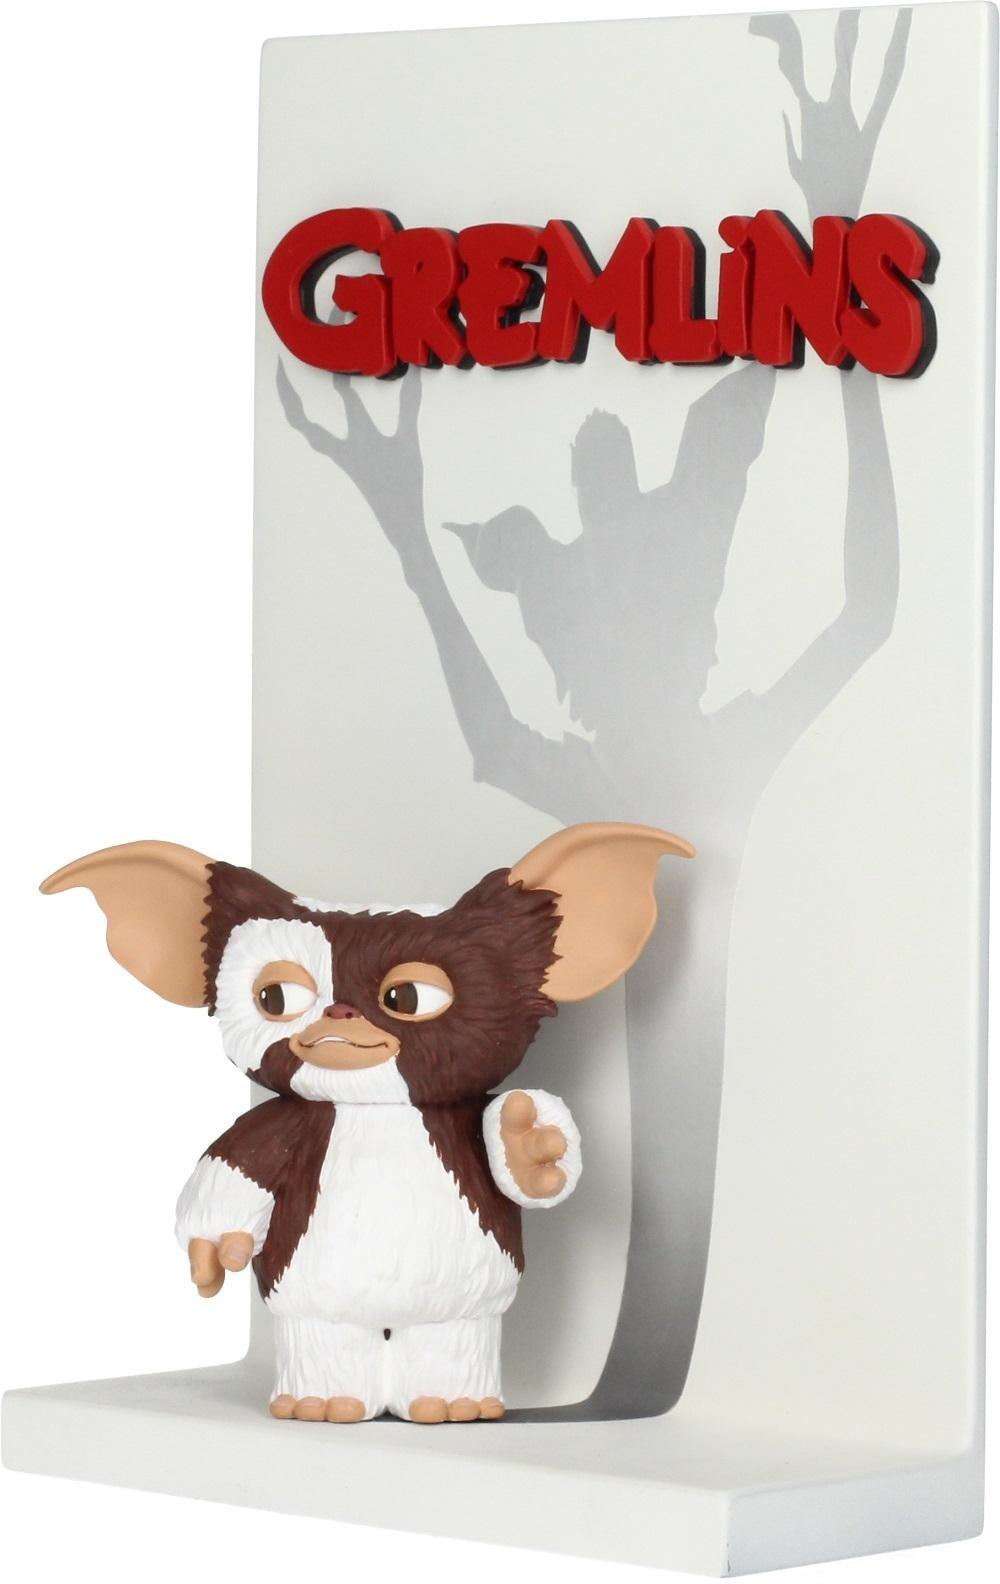 Official Gremlins Gizmo 3D Movie Poster Diorama